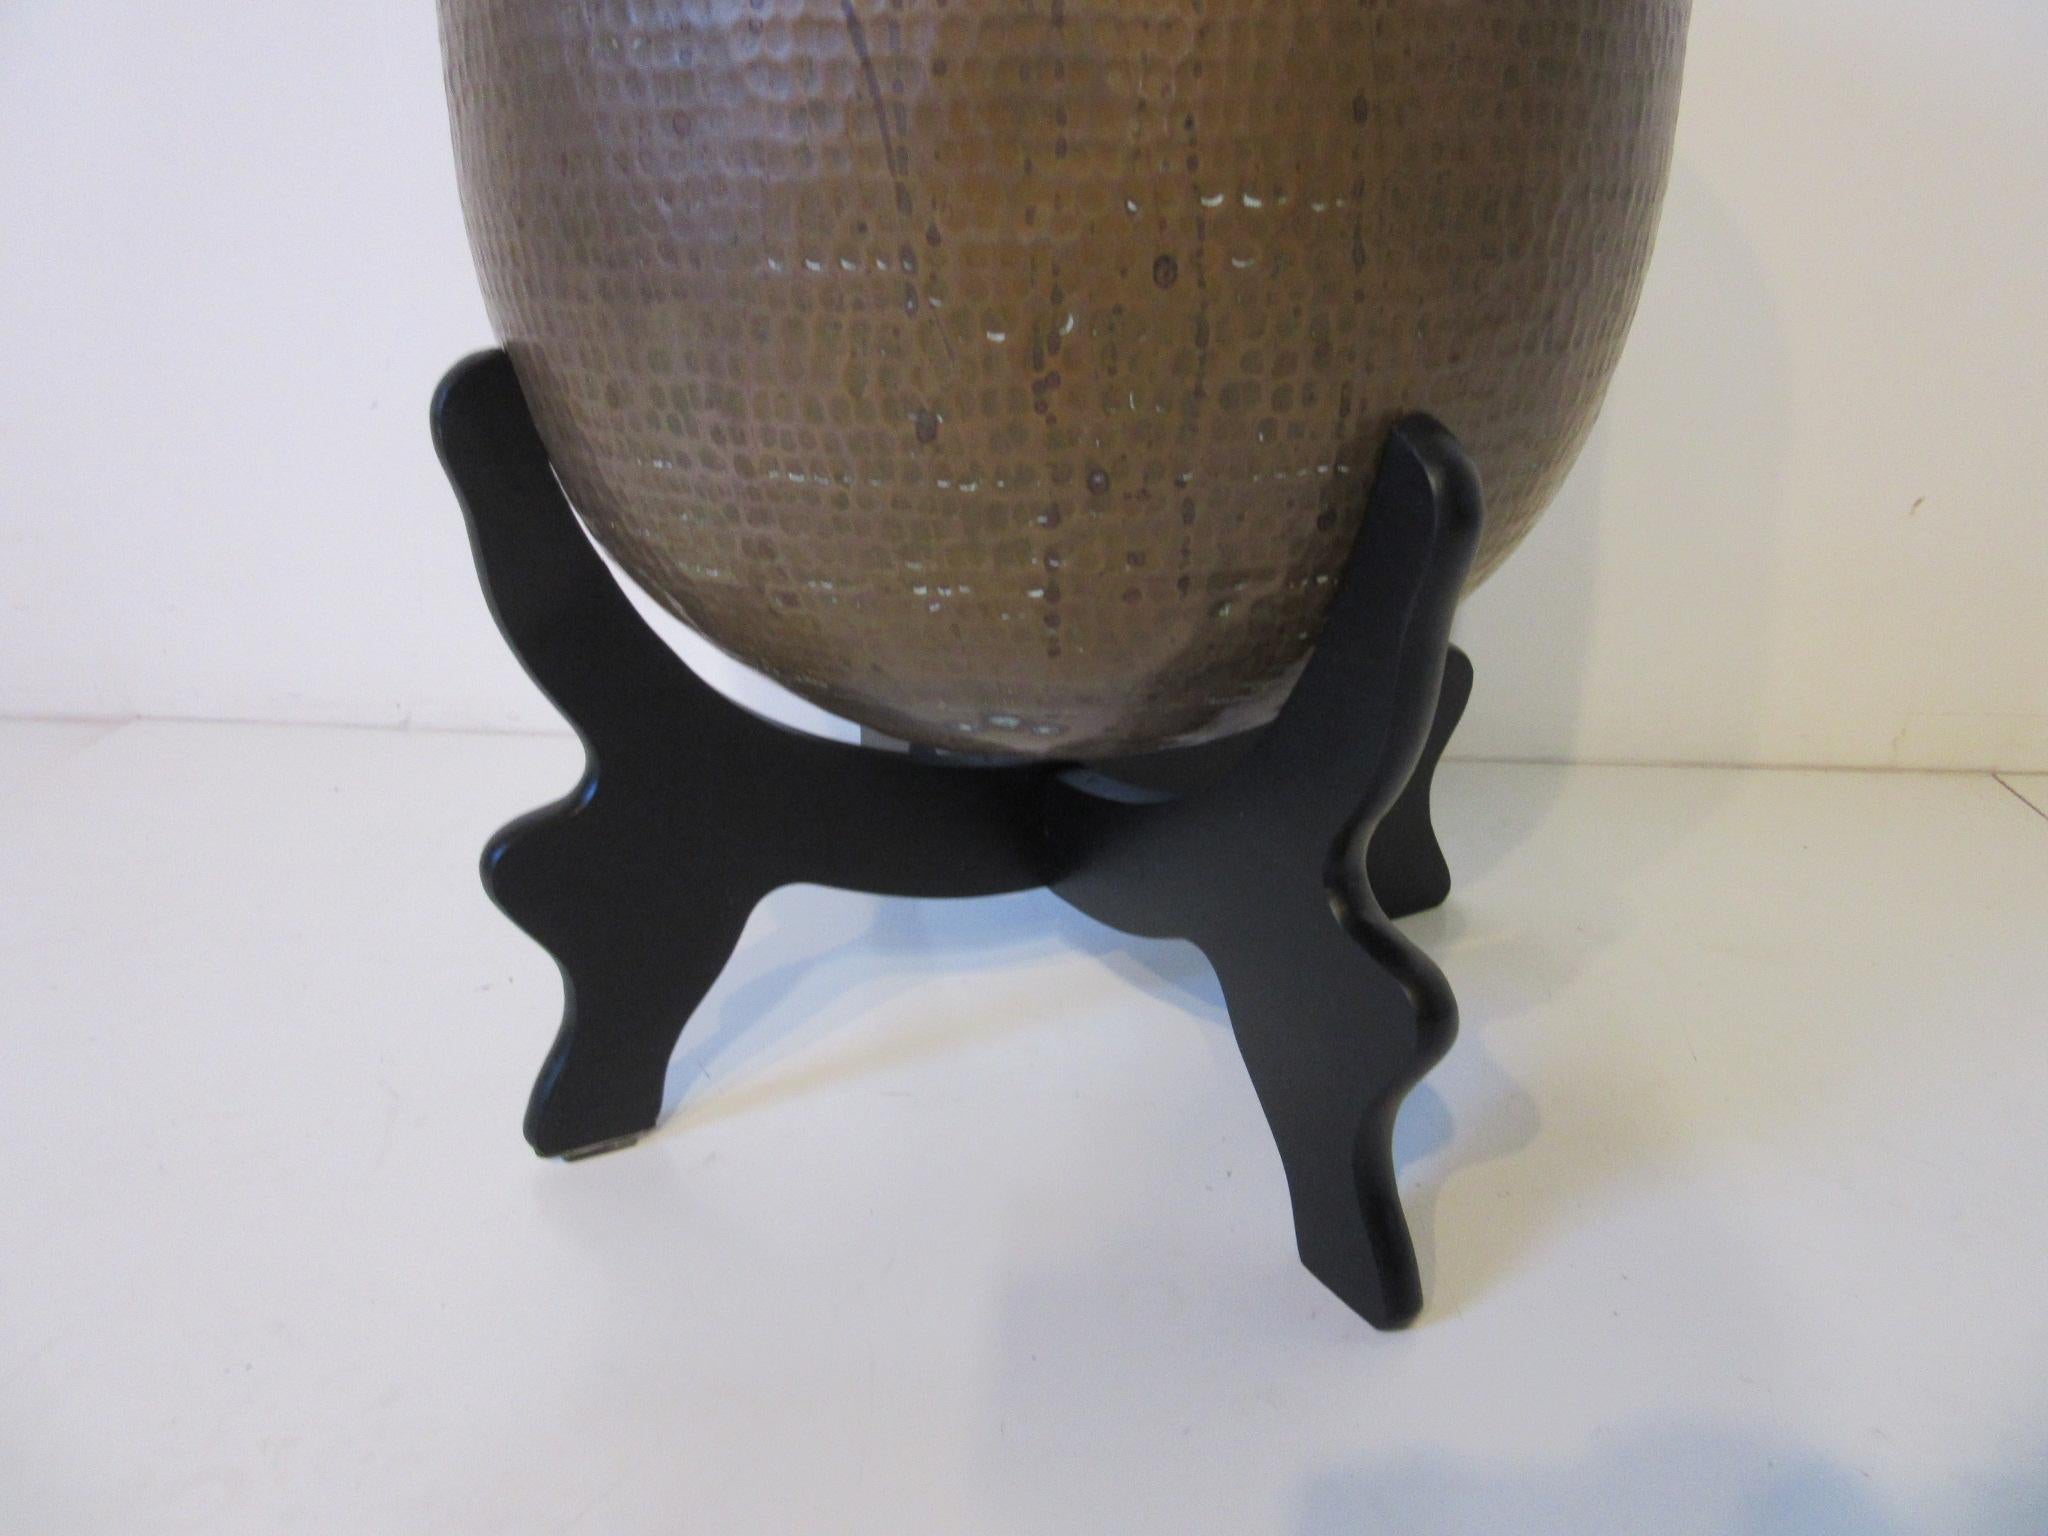 Japonisme Asian Inspired Handcrafted Brass Planter and Stand